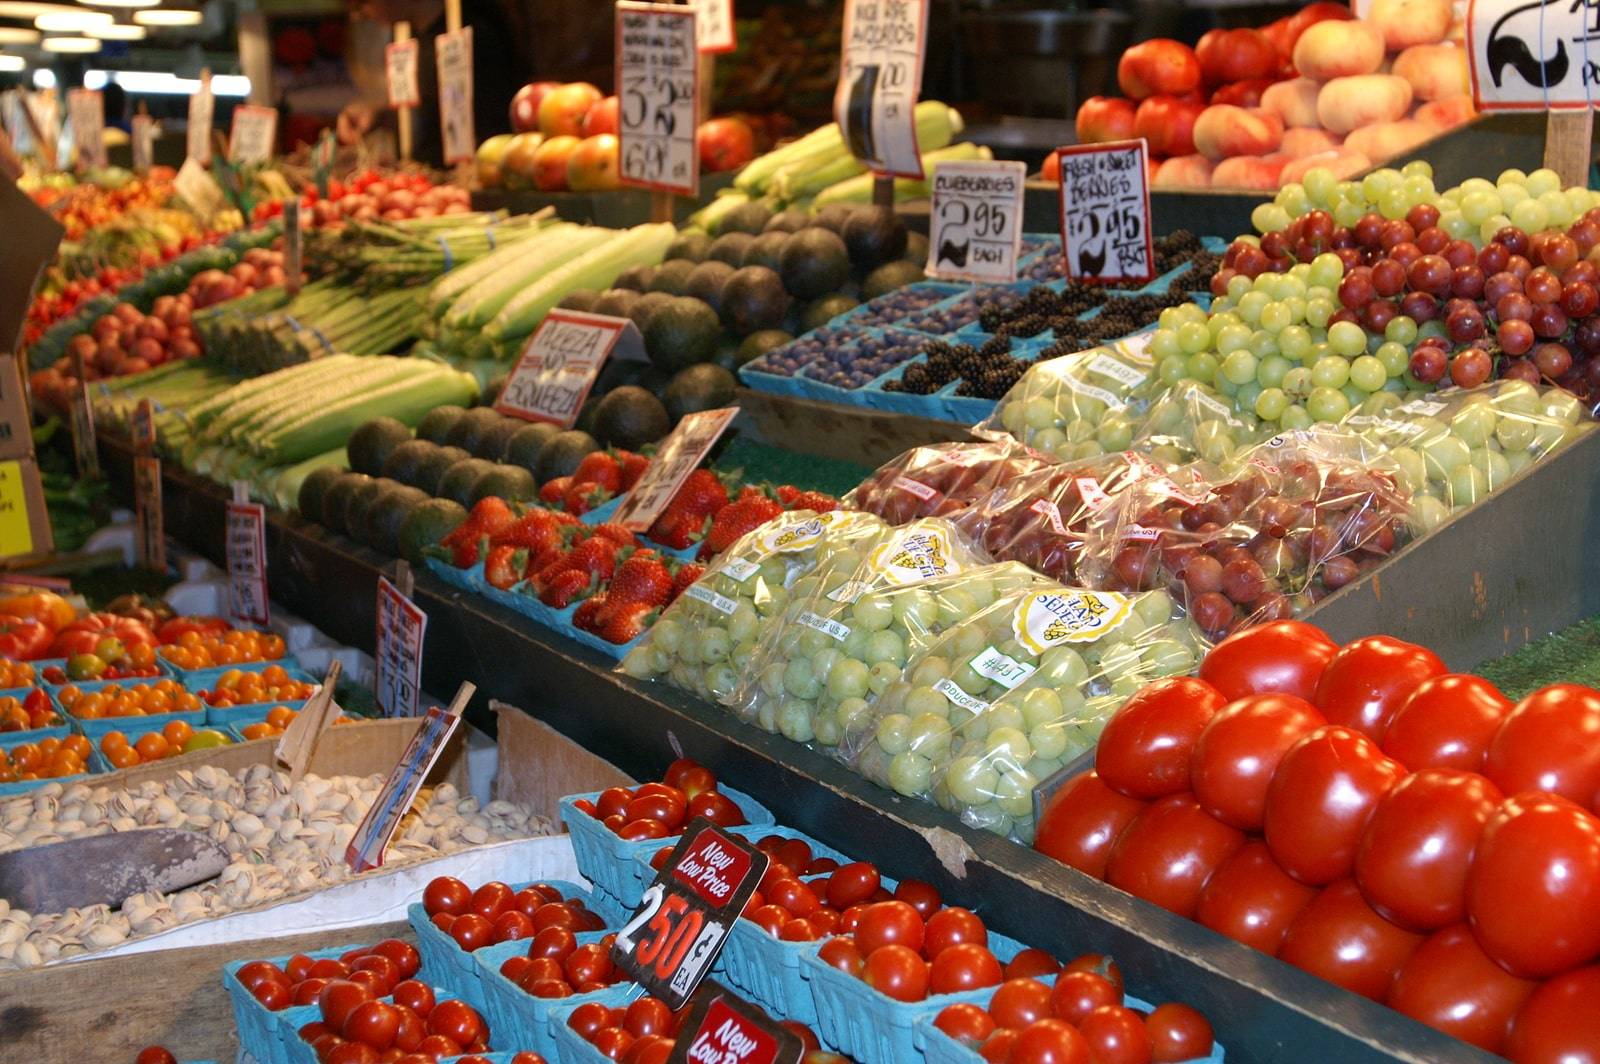 Farmers Market Lies Exposed: Vendors Lying About Their Produce